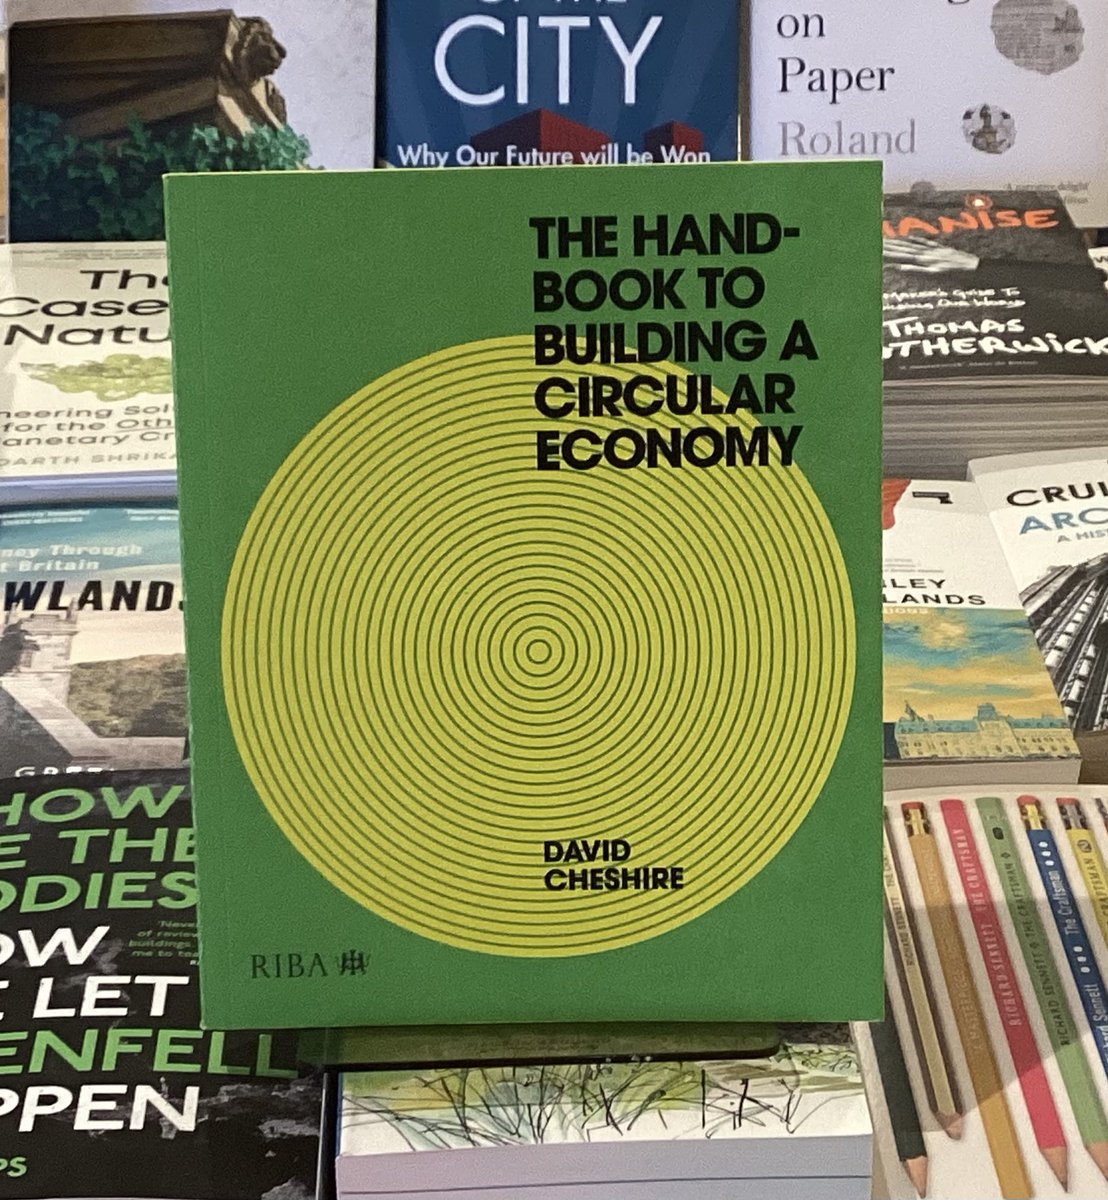 ⭐️ BOOK OF THE WEEK ⭐️ The Handbook to Building a Circular Economy by David Cheshire A must-have companion to help create a more sustainable future. This book explains in simple & practical terms how the principles of a circular economy can be applied to the built environment